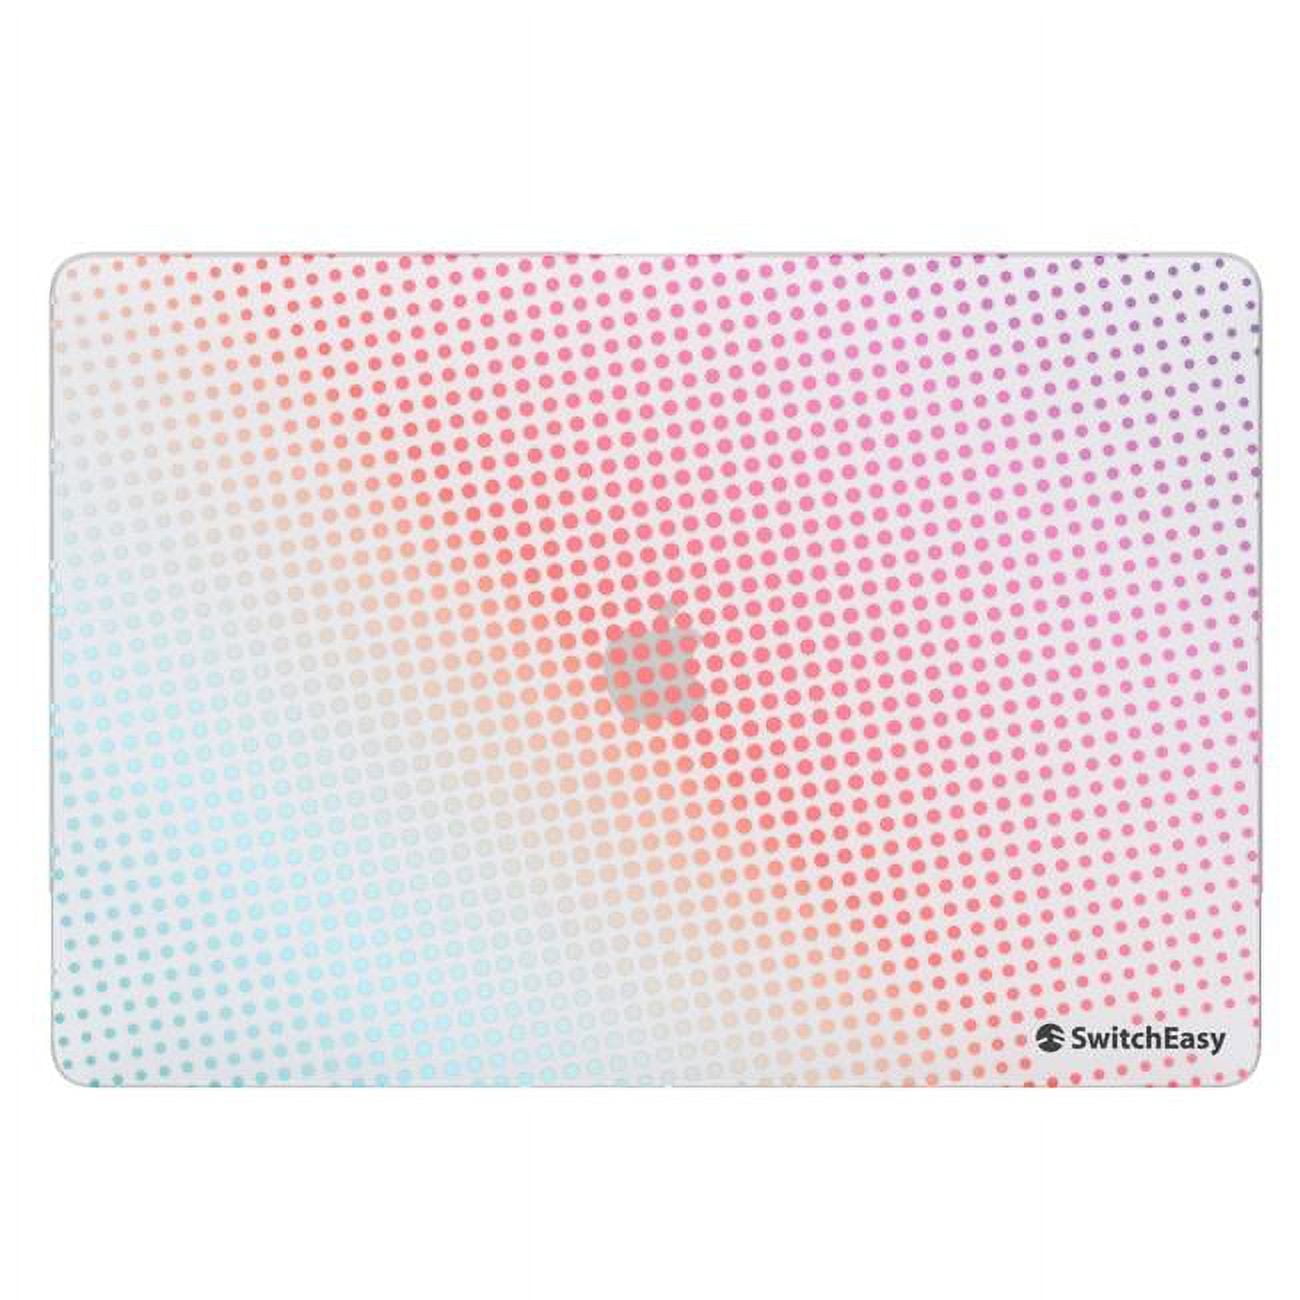 Picture of SwitchEasy GS-105-24-218-156 13 in. Artist MacBook Protective Case for M1 Intel 2018-2020 MacBook Air, Aurora